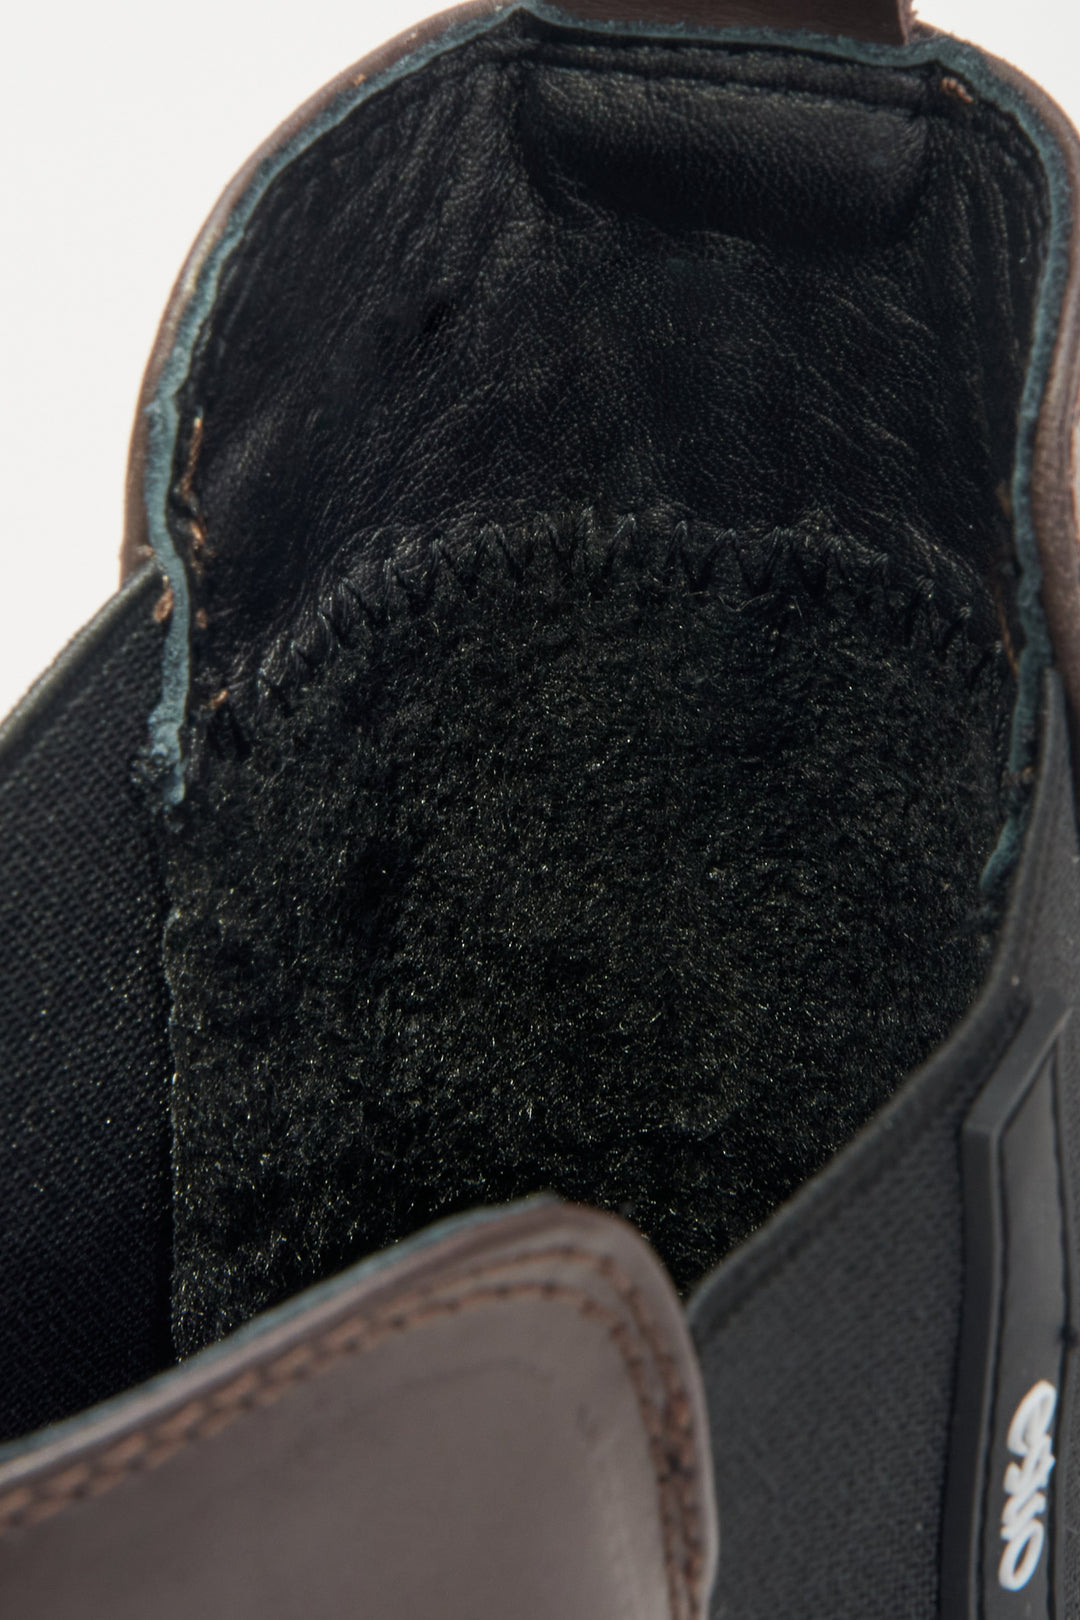 Women's brown-black Estro Chelsea boots - close-up on the elastic uppers.